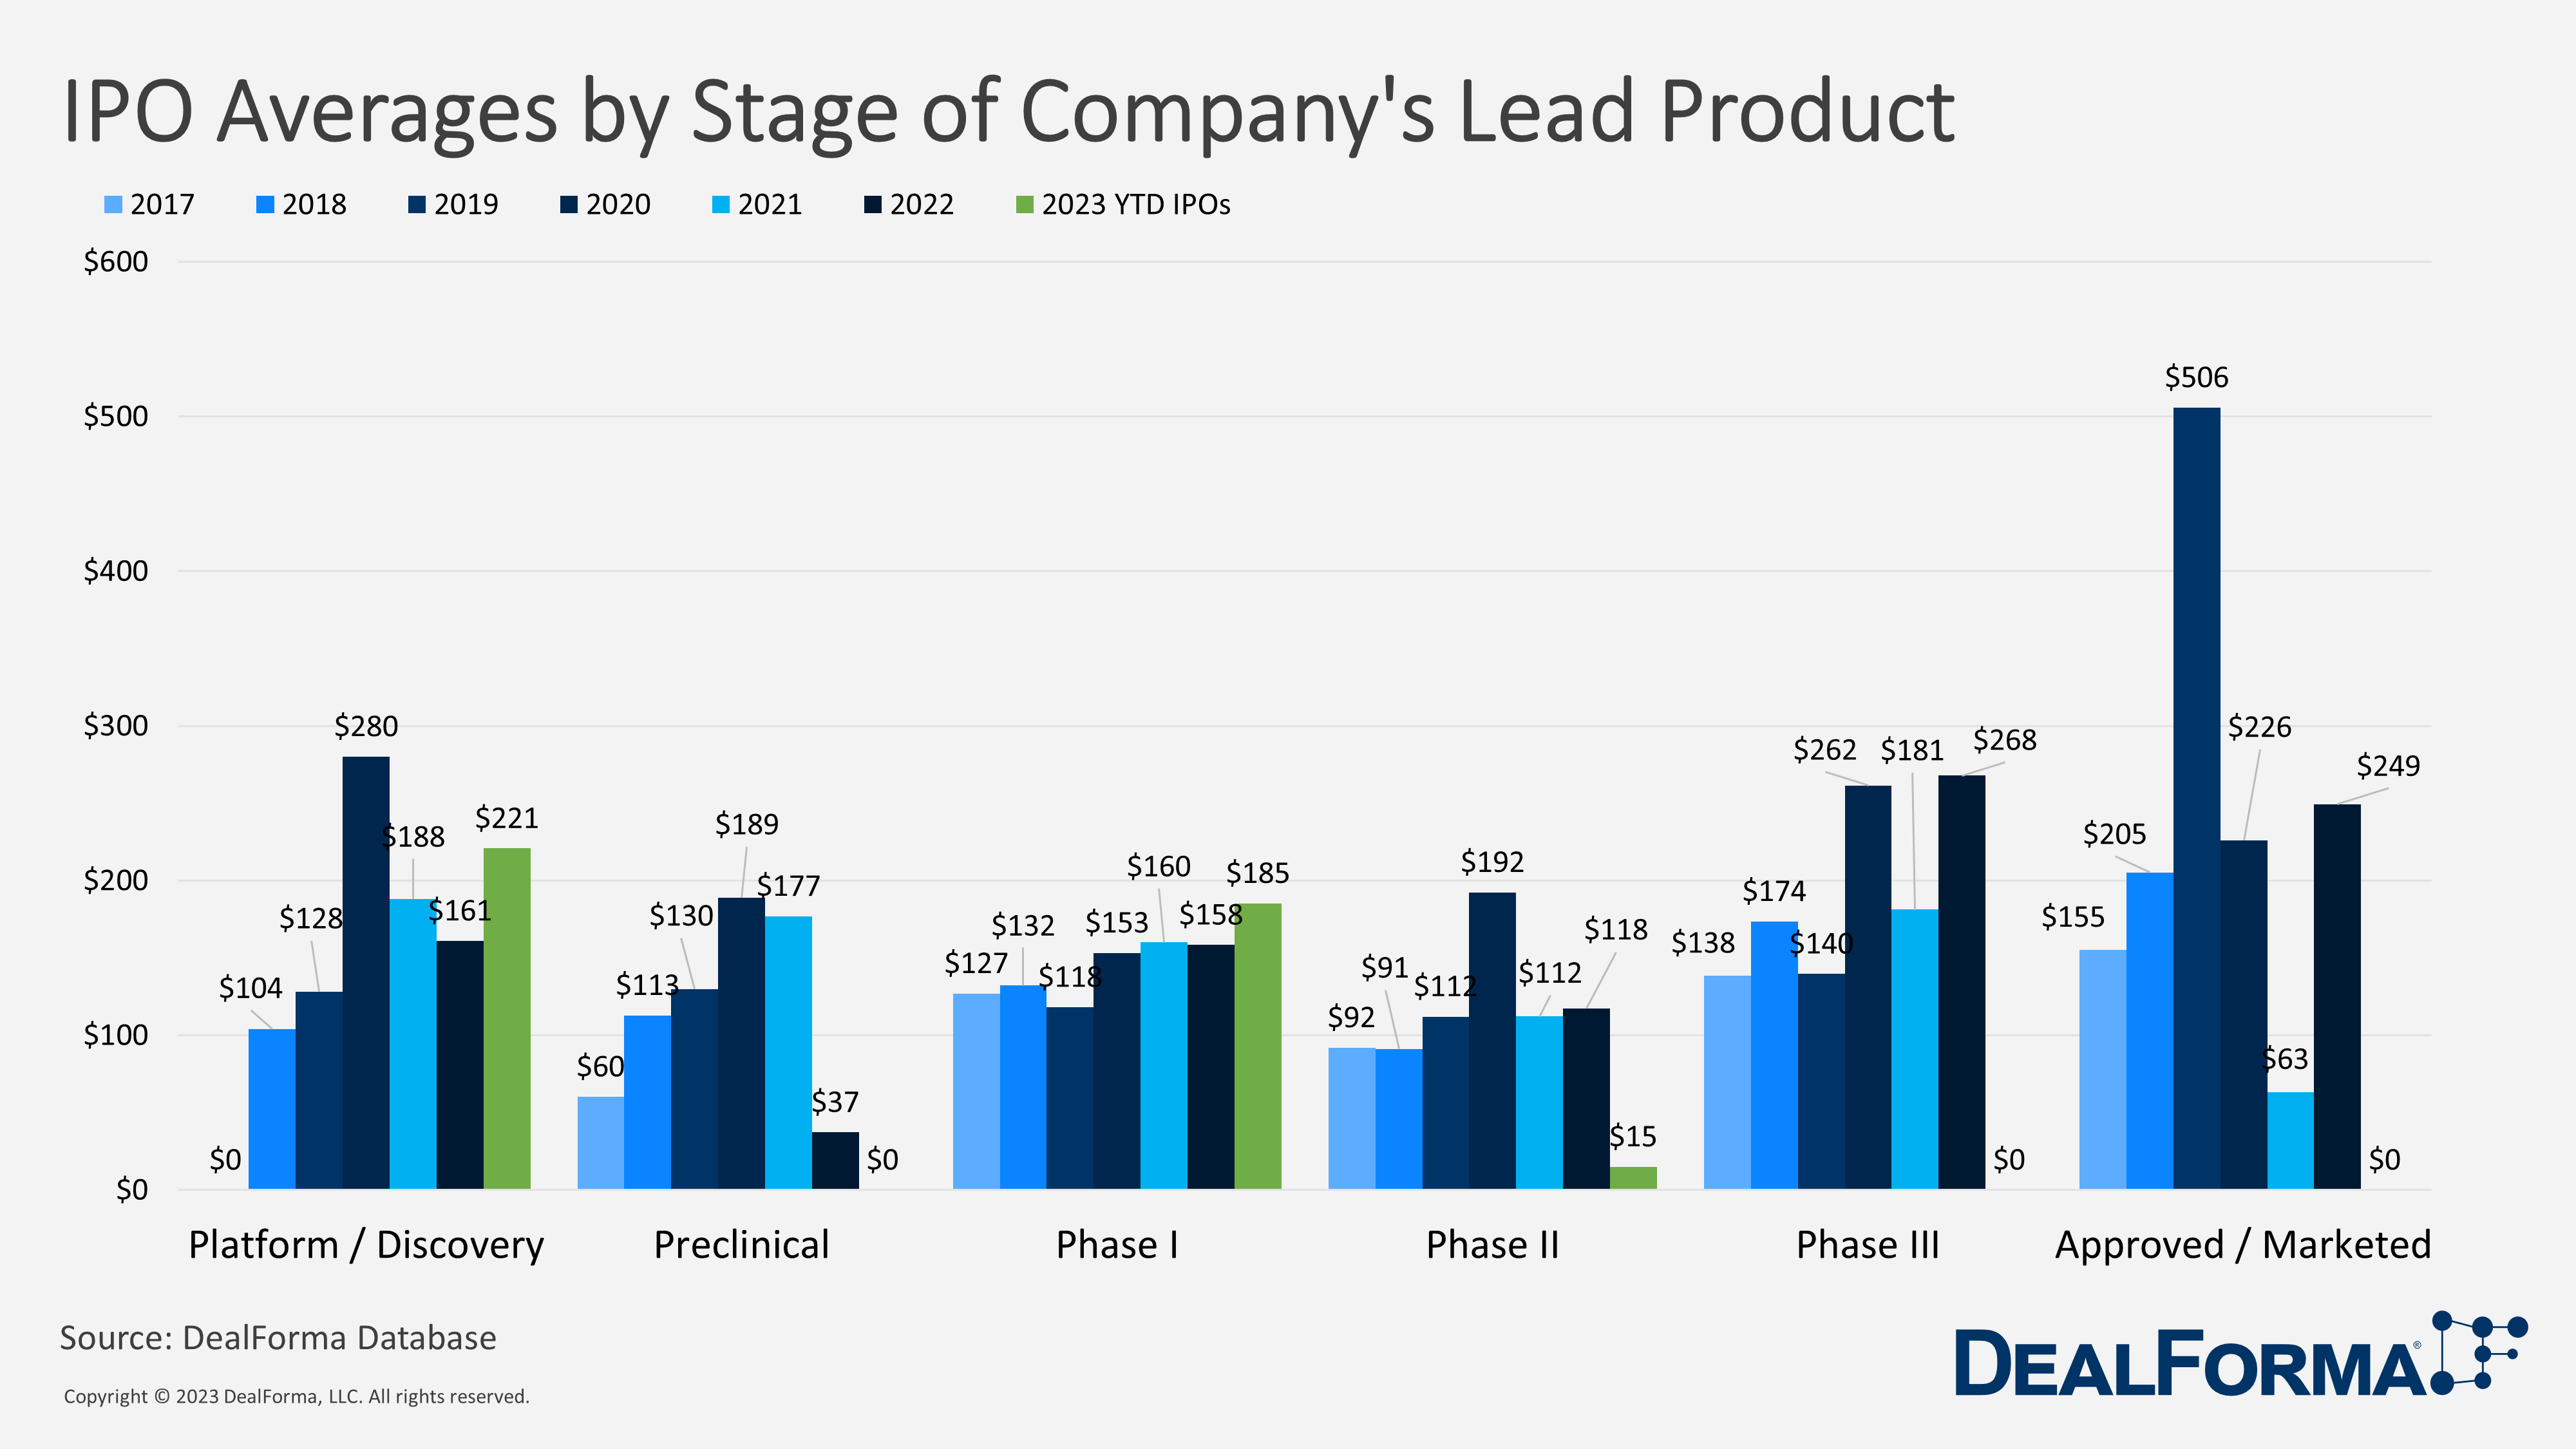 IPO Averages by Stage of Company's Lead Product